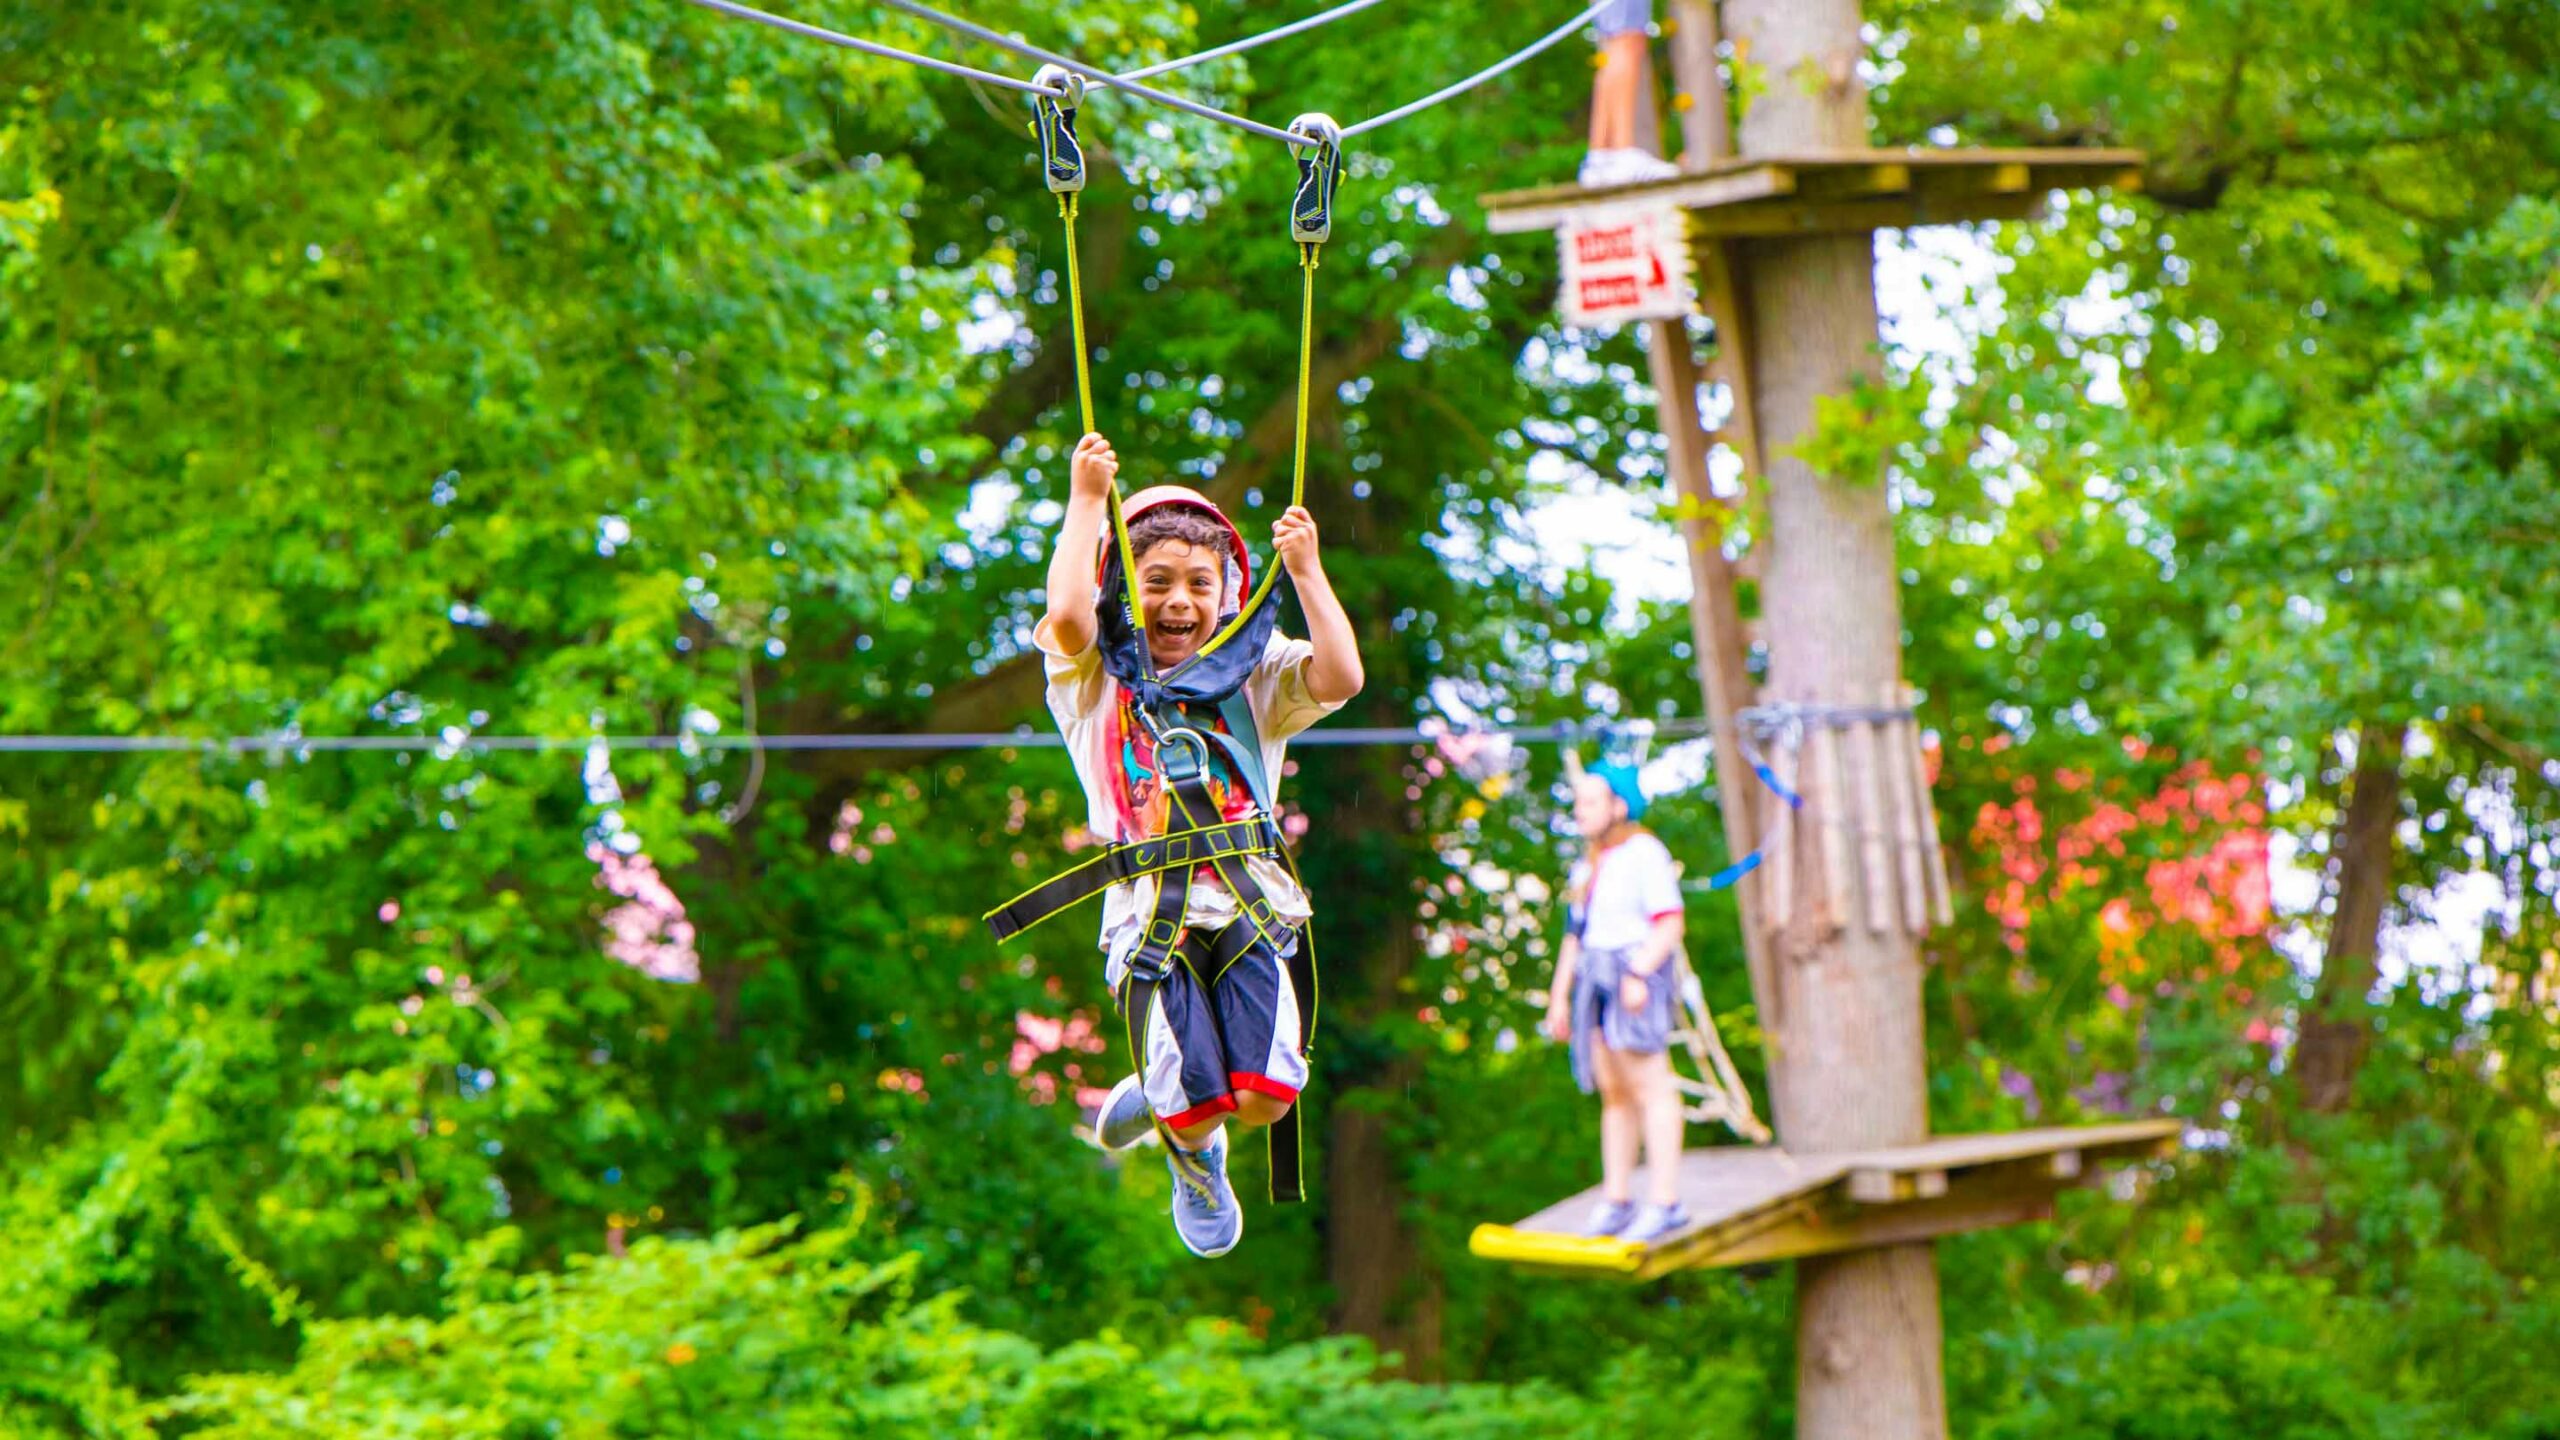 Young camper ziplines through forest canopy